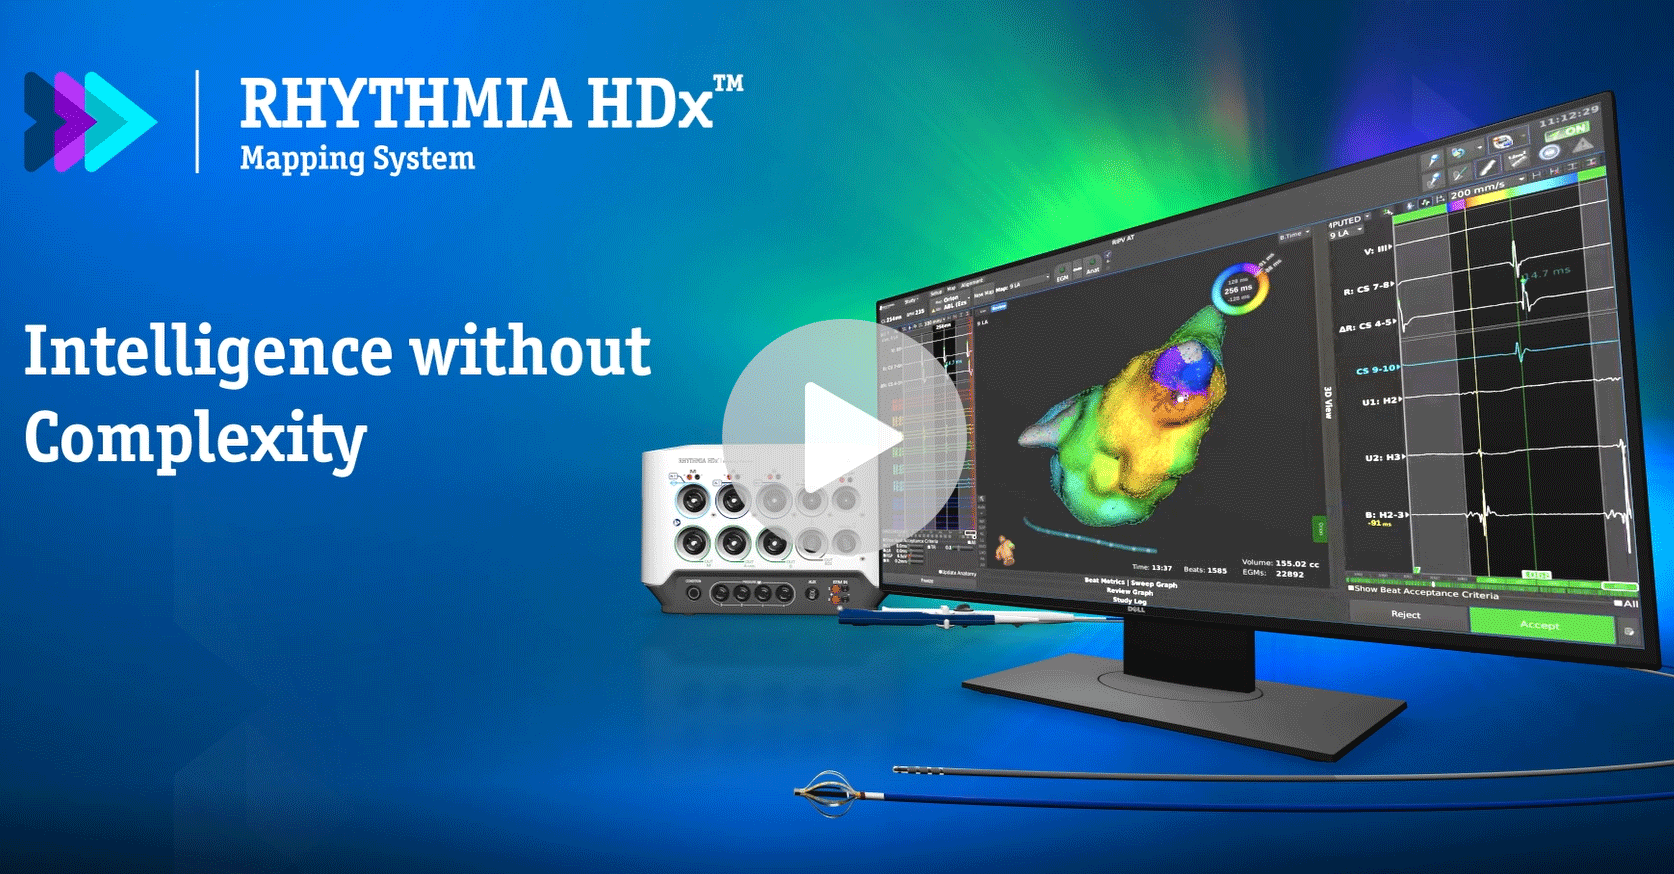 A comprehensive portfolio of mapping and RF ablation solutions, RHYTHMIA HDx sets the standard for high-definition mapping, streamlines the identification of areas of clinical interest, and offers critical insights into tissue resistivity and lesion formation.